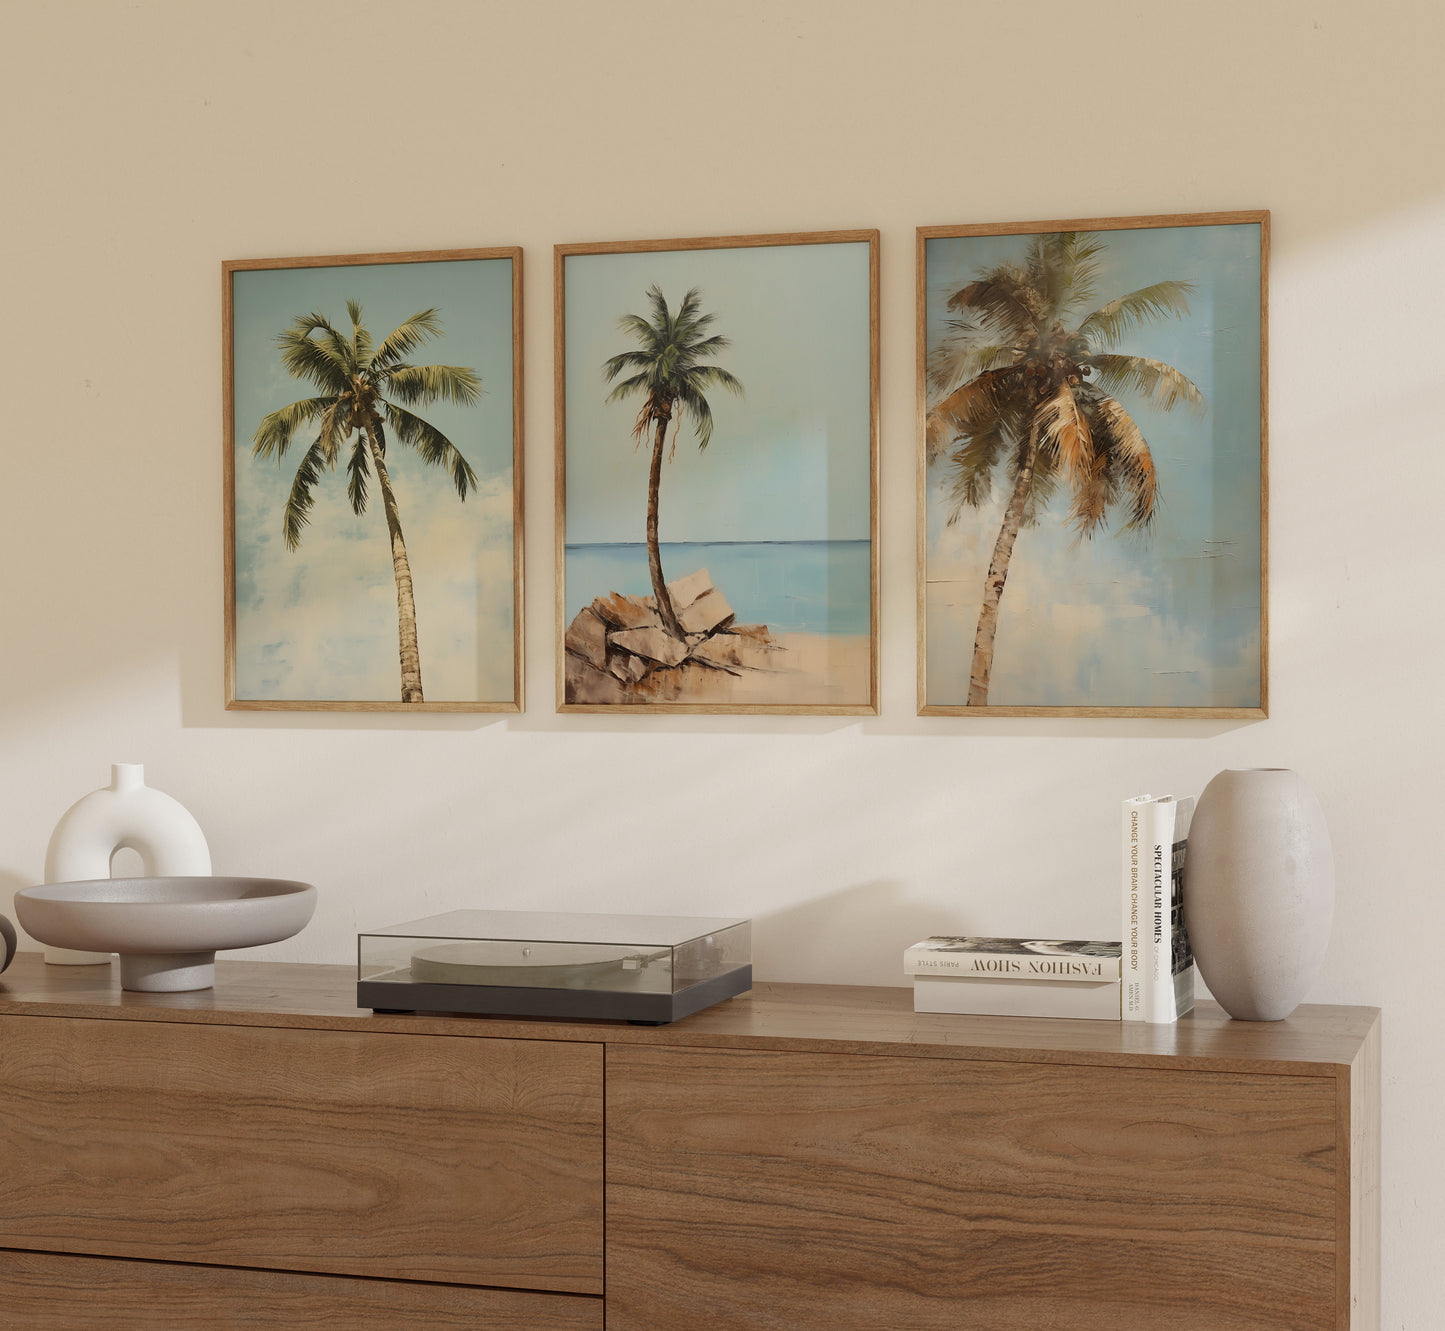 Three framed pictures of palm trees on a wall above a wooden sideboard with decorative items.